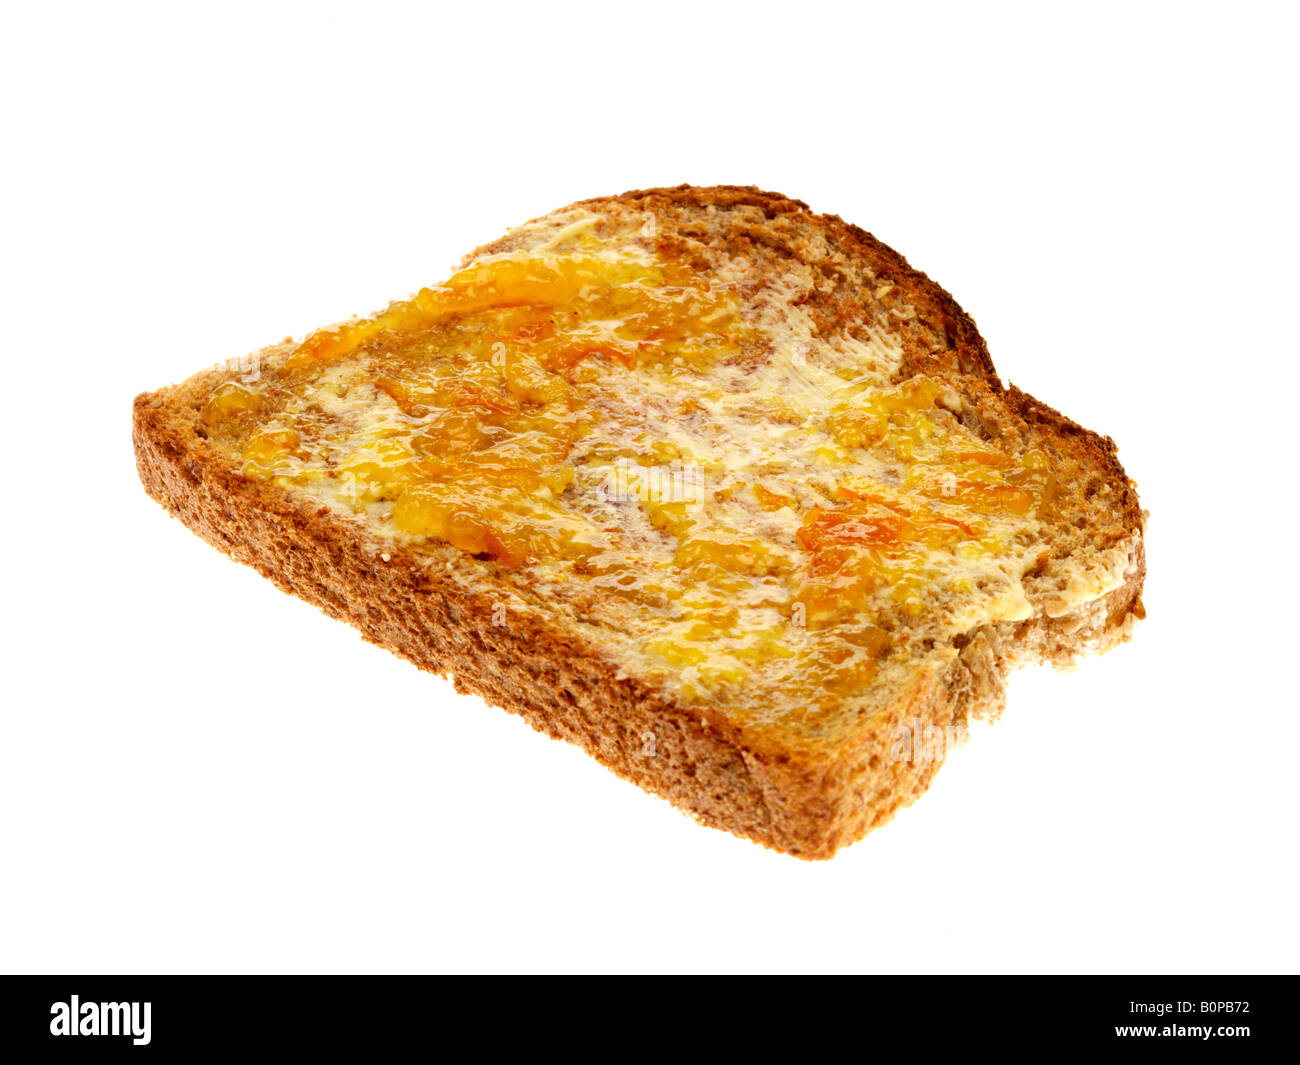 Fresh Sweet Wholemeal Toast With Marmalade Isolated Against A White Background With A Clipping Path And No People Stock Photo